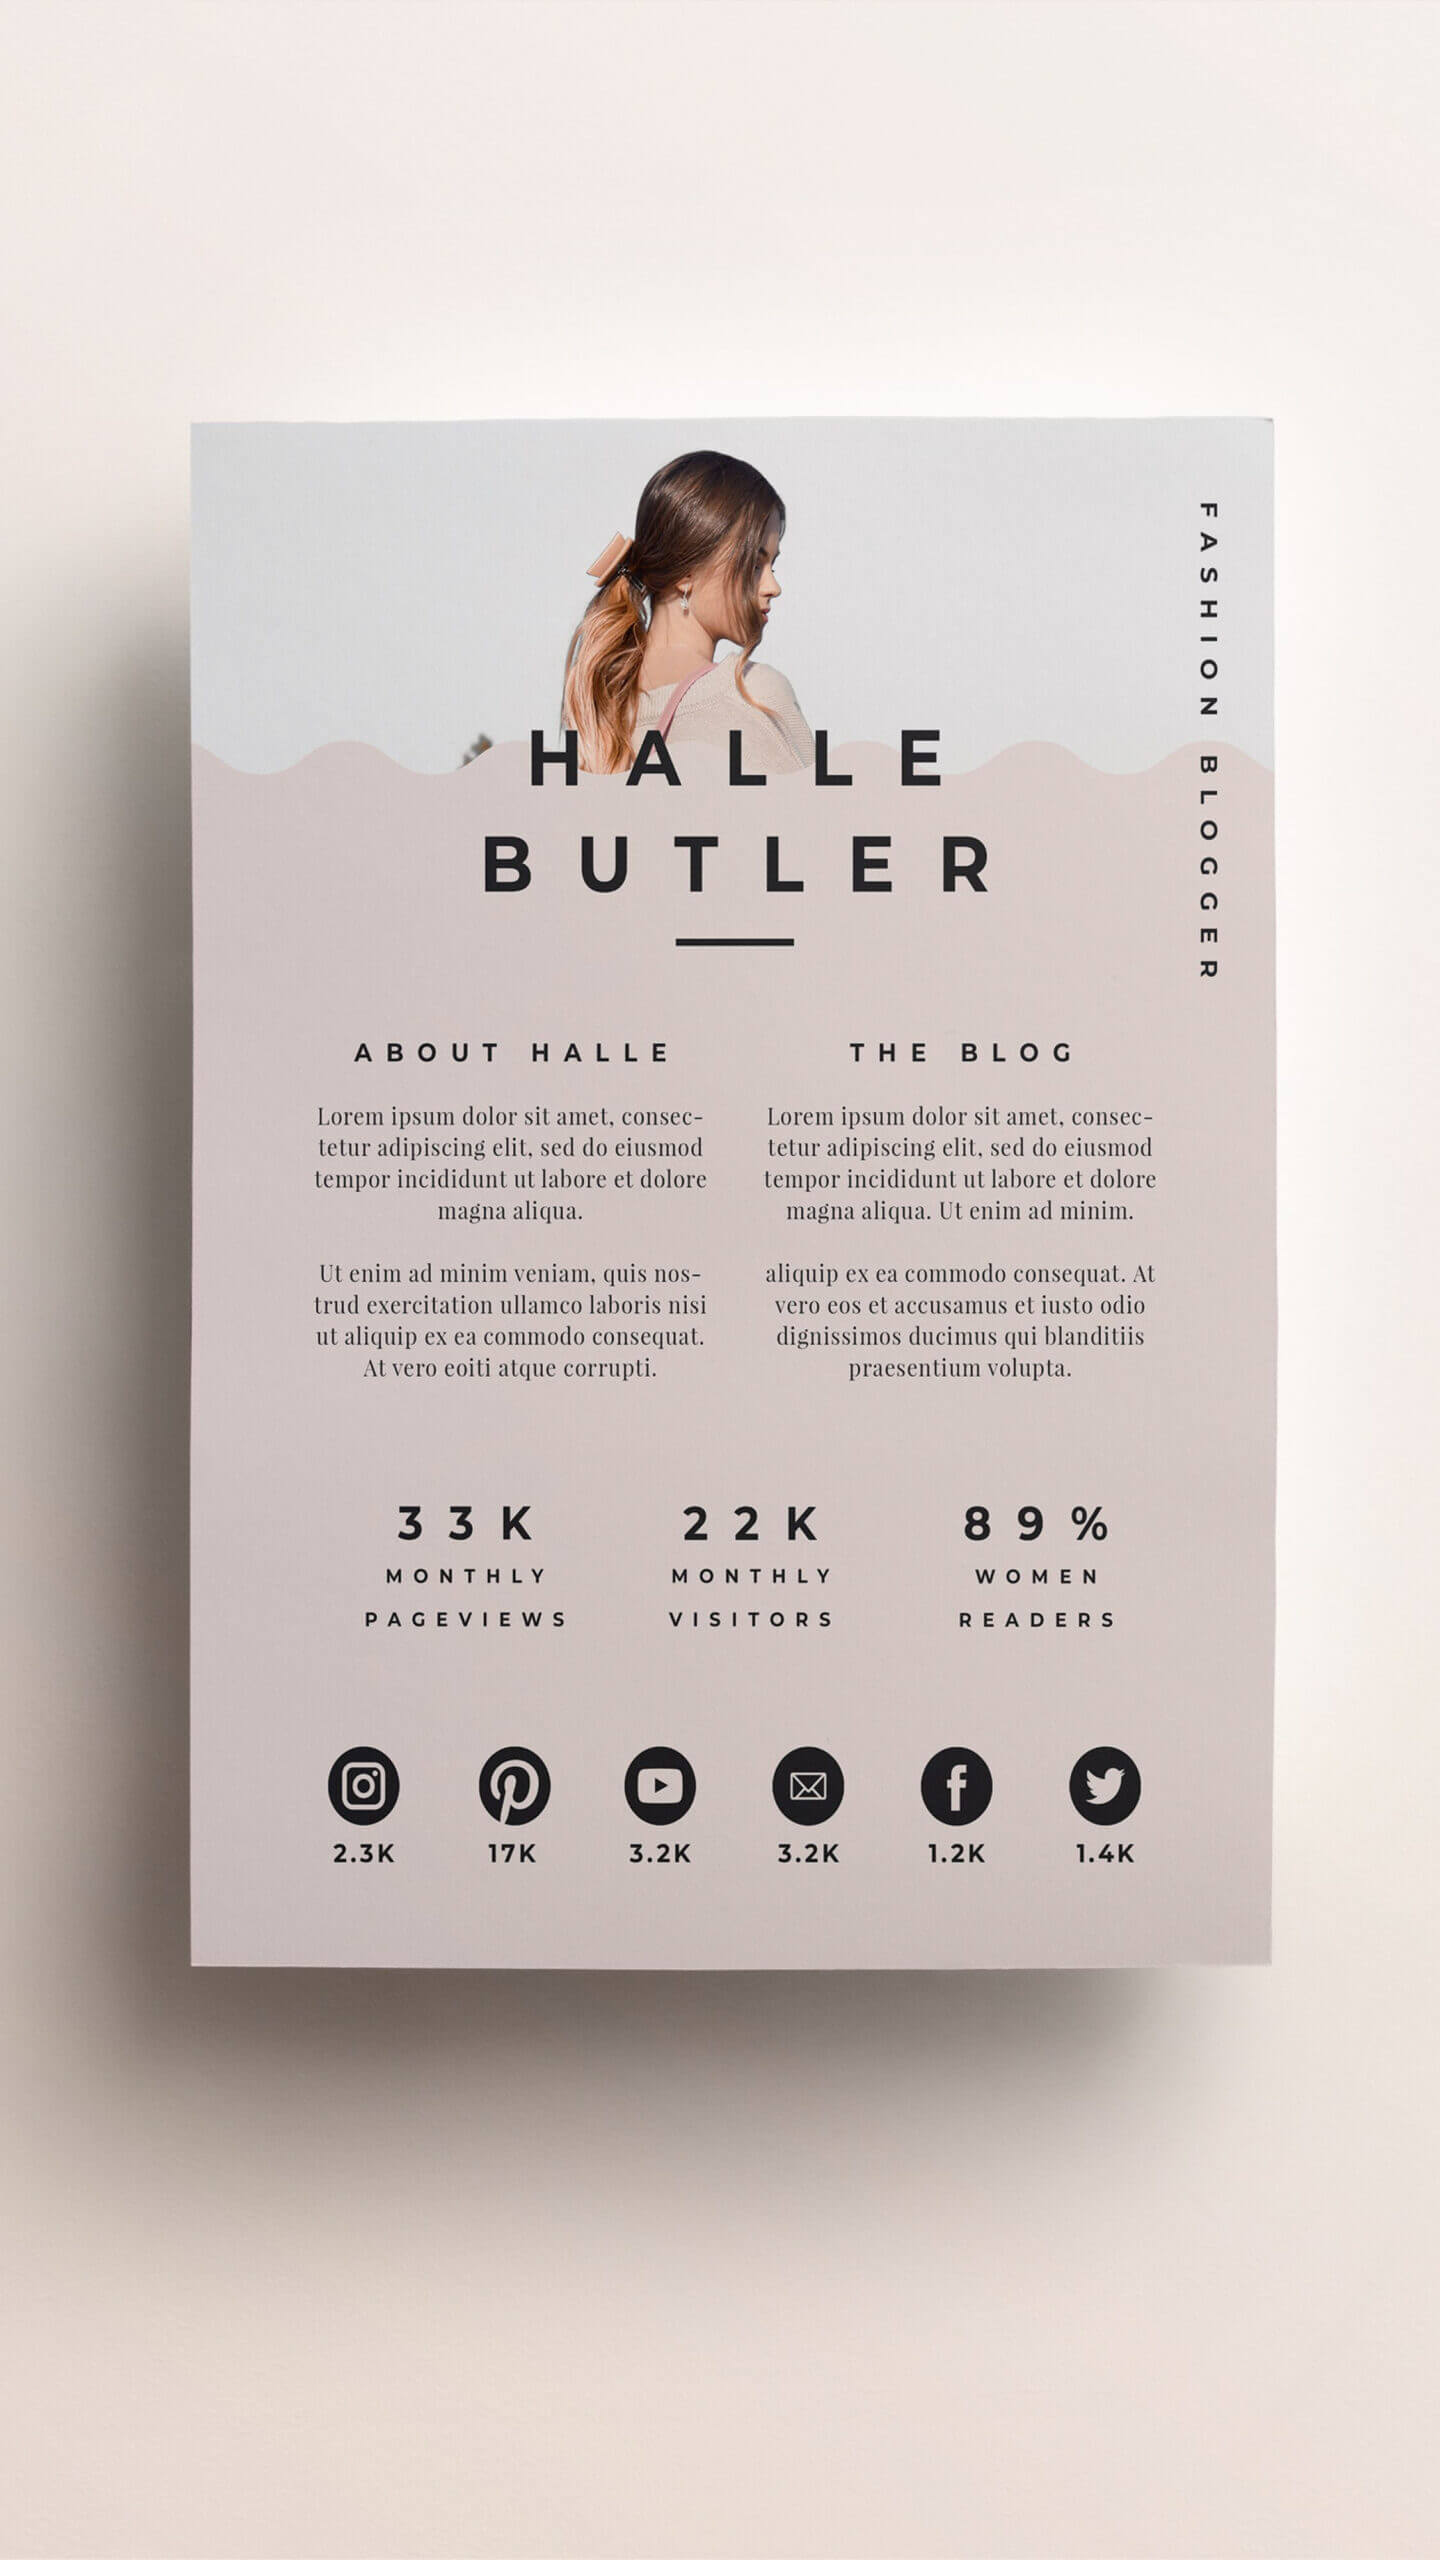 Media Kit And Price List For Bloggers And Influencers Intended For Rate Card Template Word